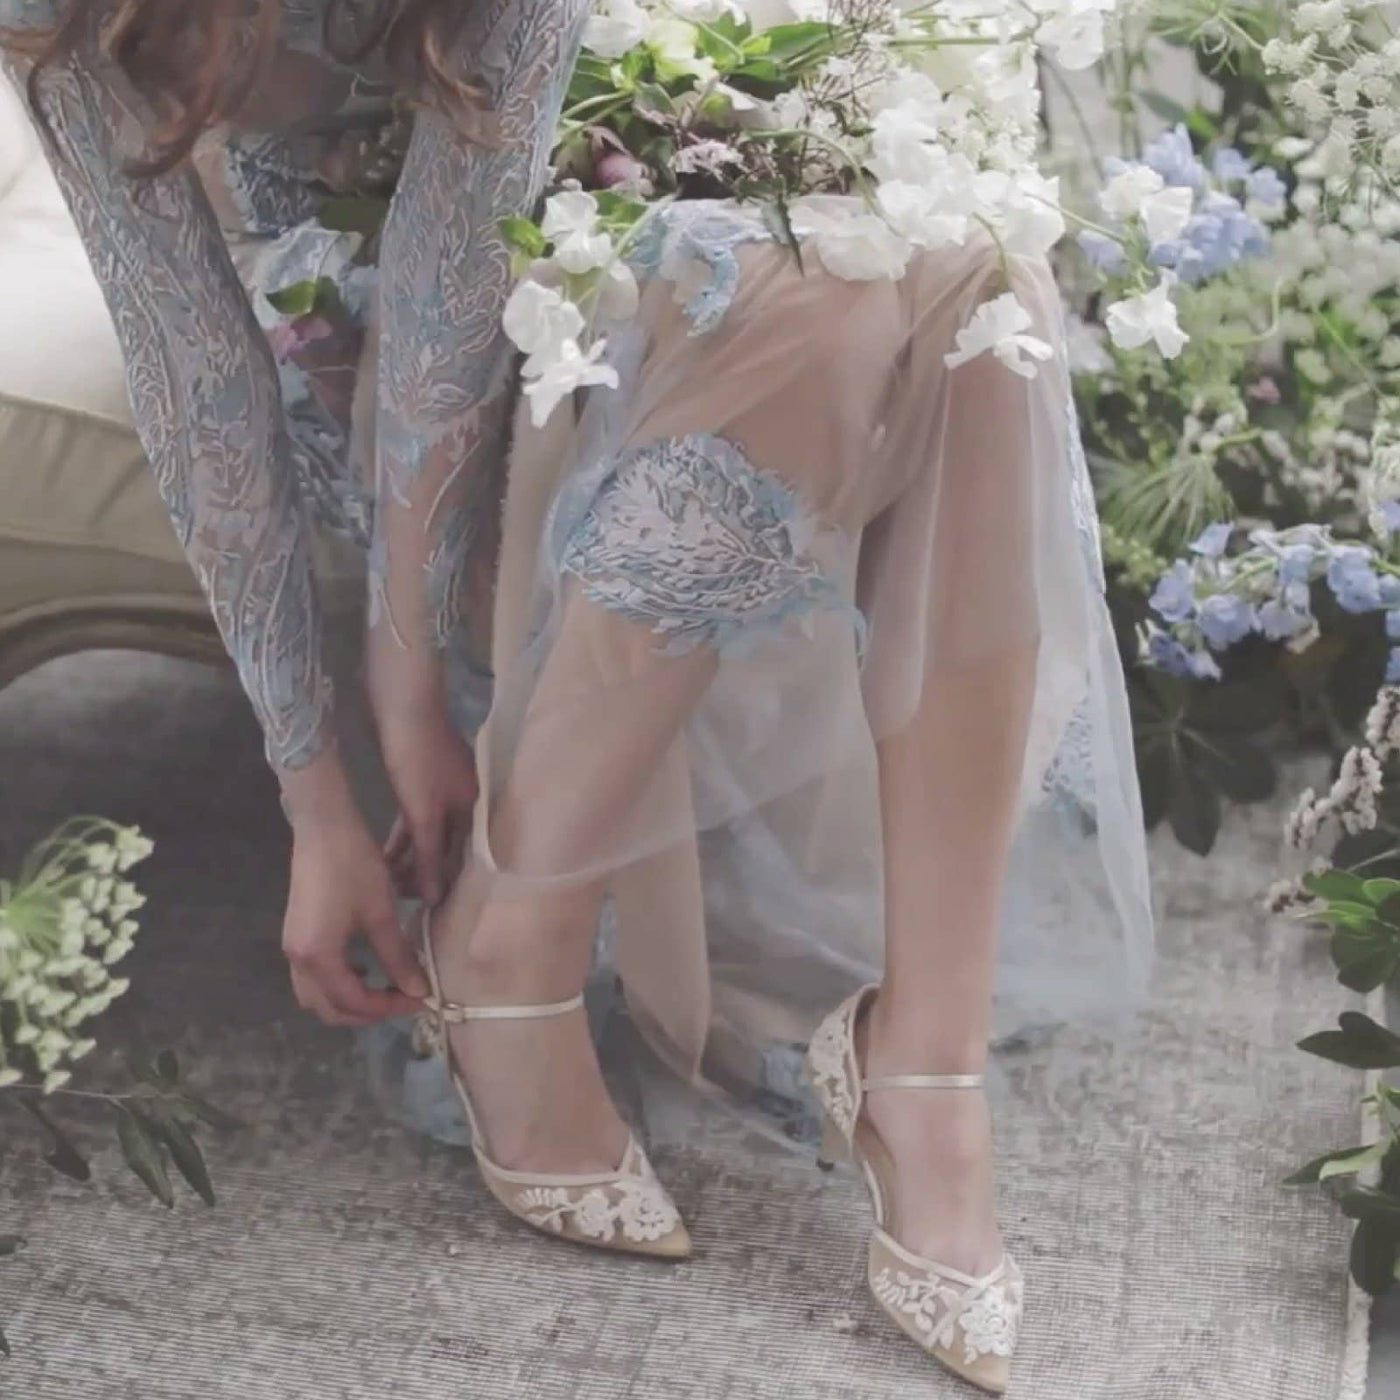 Candice Lace Wedding Heels in Nude Ivory by Bella Belle Shoes